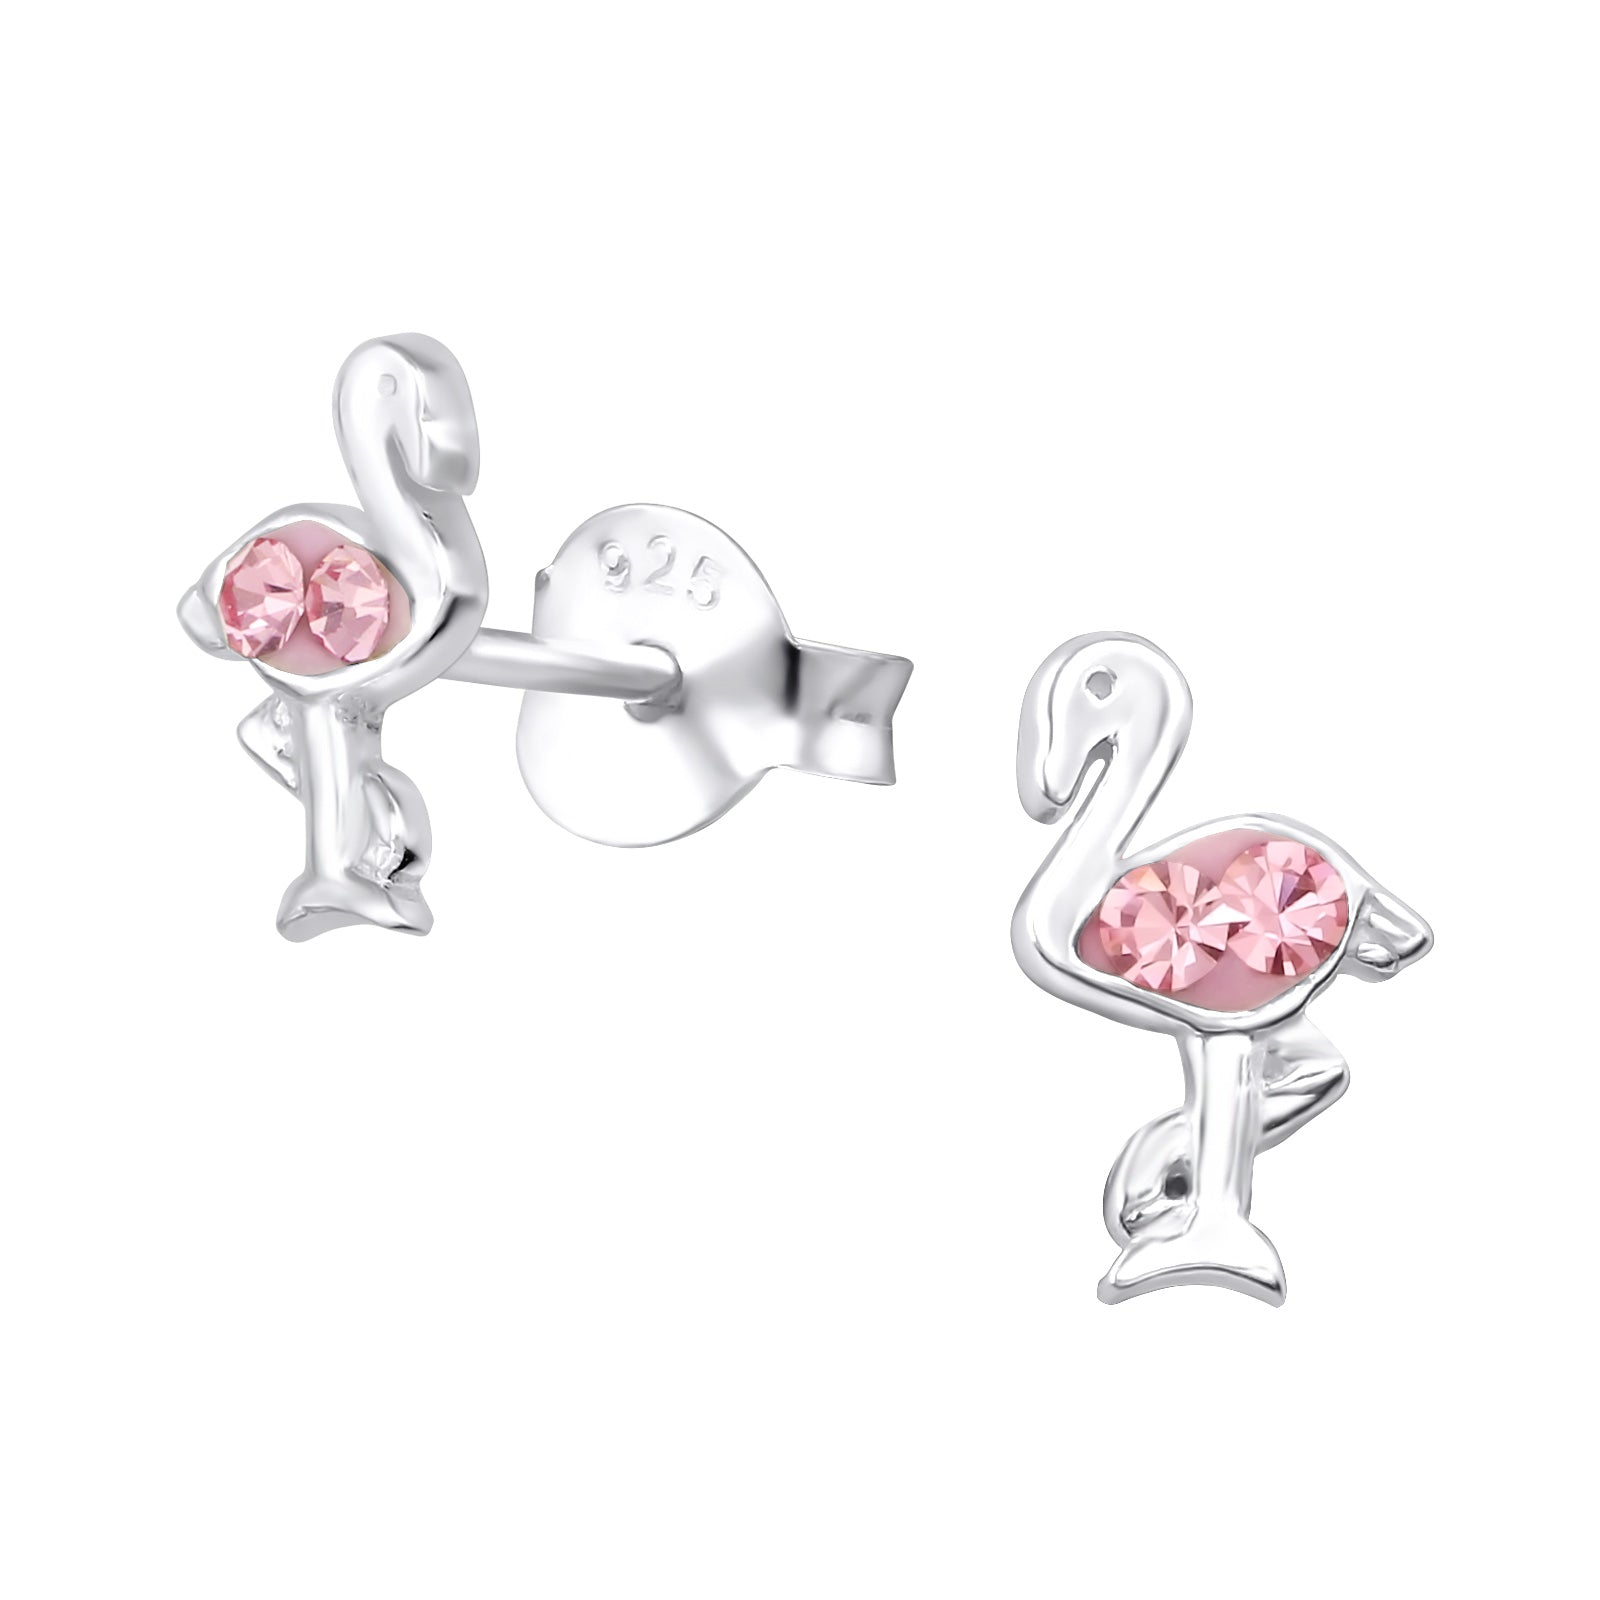 Fabulous flamingo dainty stud earrings with pink crystals.